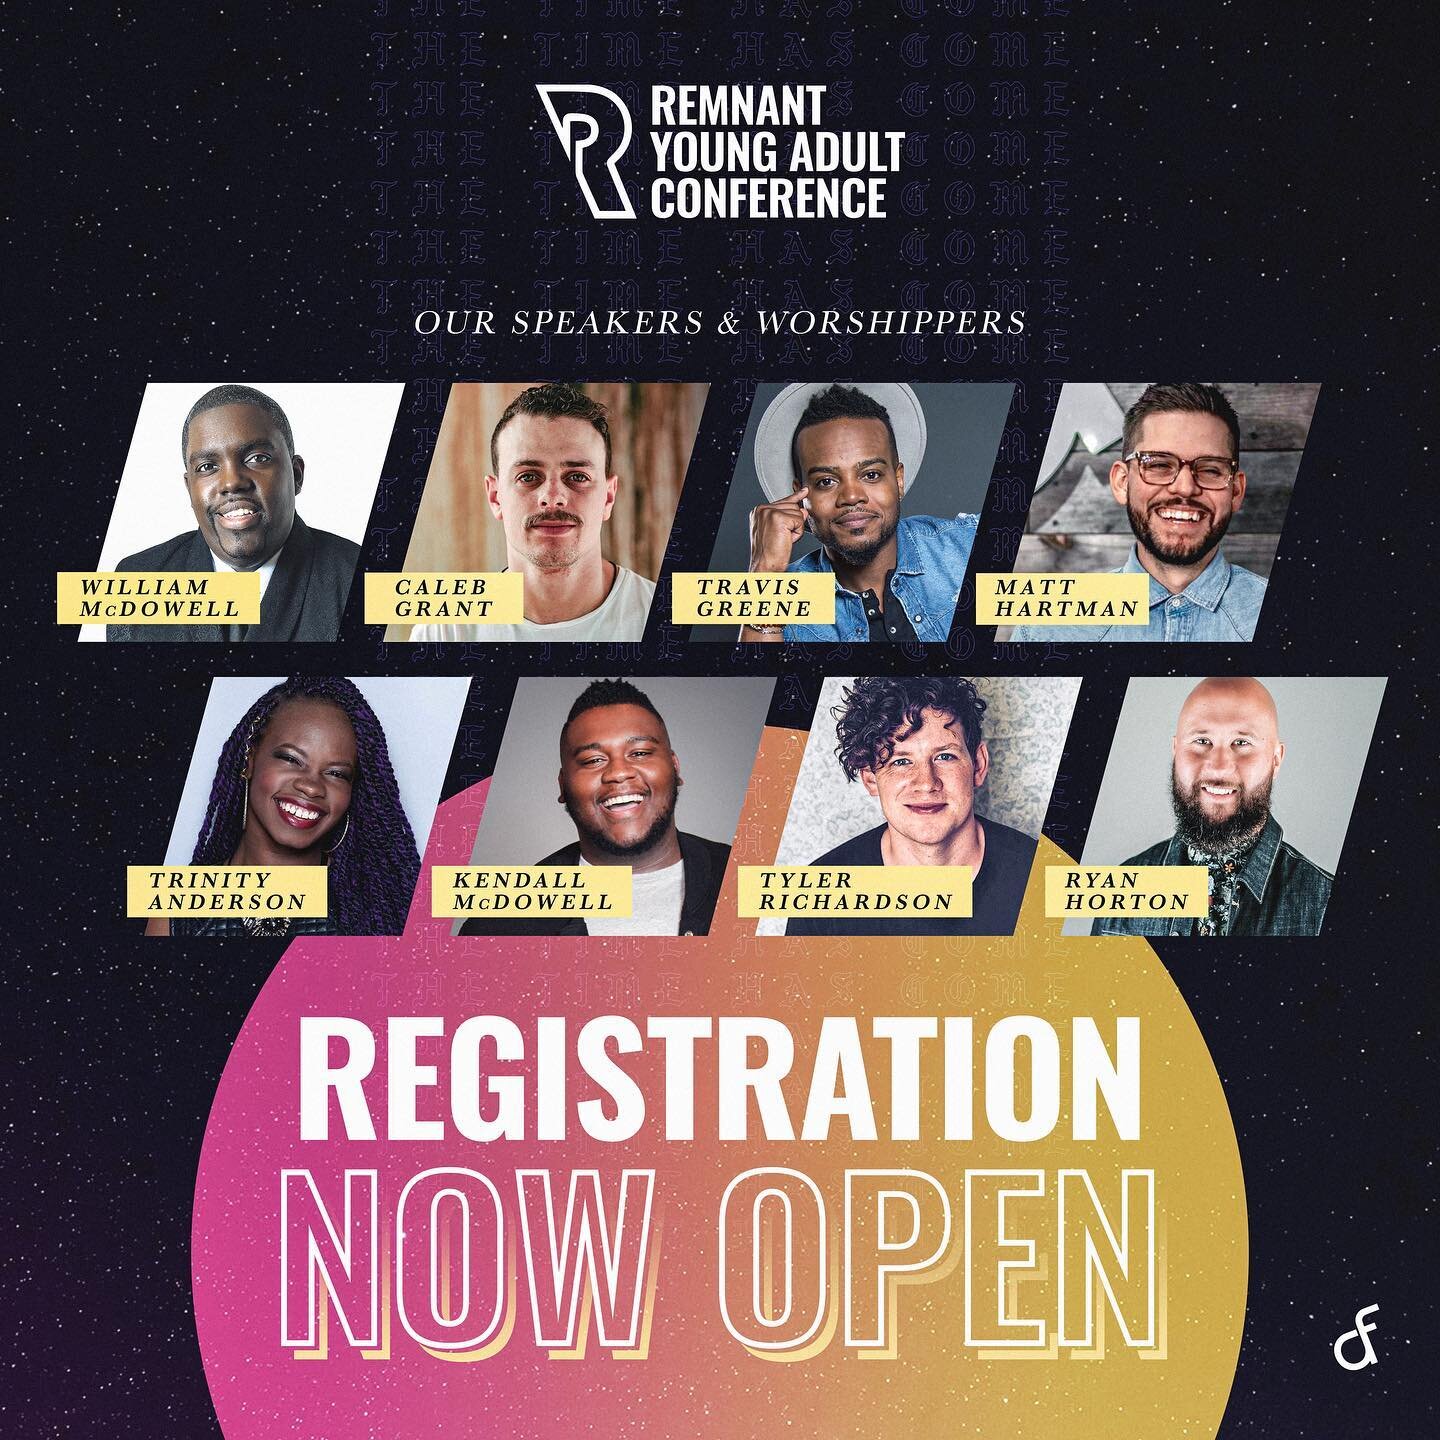 Excited to have been a part of designing deliverables for this great conference! #RemnantConf19 #TheTimeHasCome